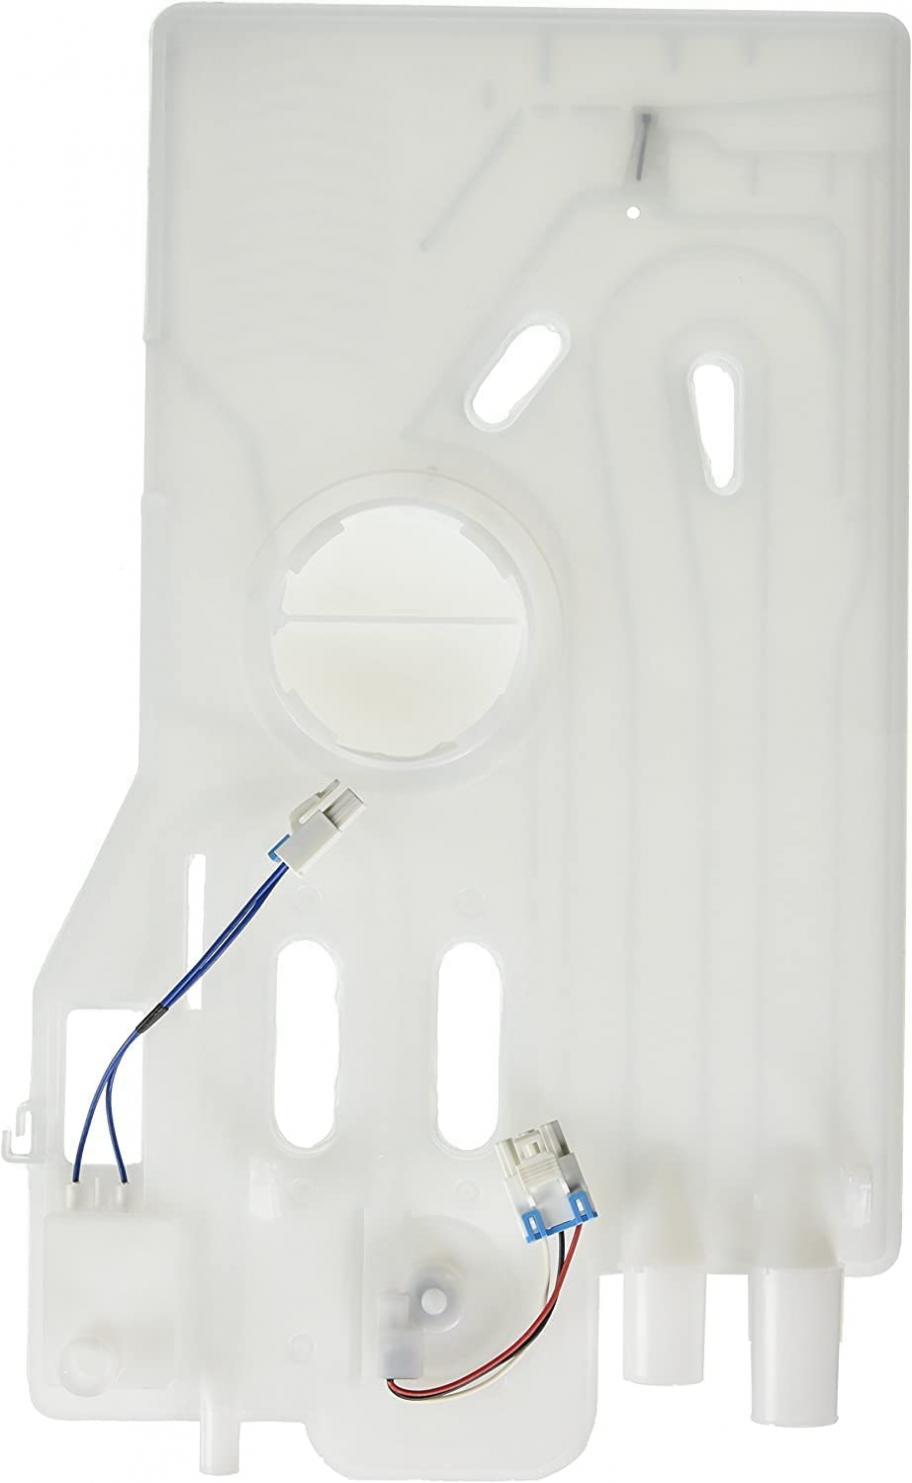 Sunniwi Sunniswi DD82-01111A / DD81-02138A DD82-01373A Dishwasher A/S Assy-Case Brake Air Parts Include a Flow sensor Leakage - Compatible Replacement for Samsung Dishwasher, transparent color